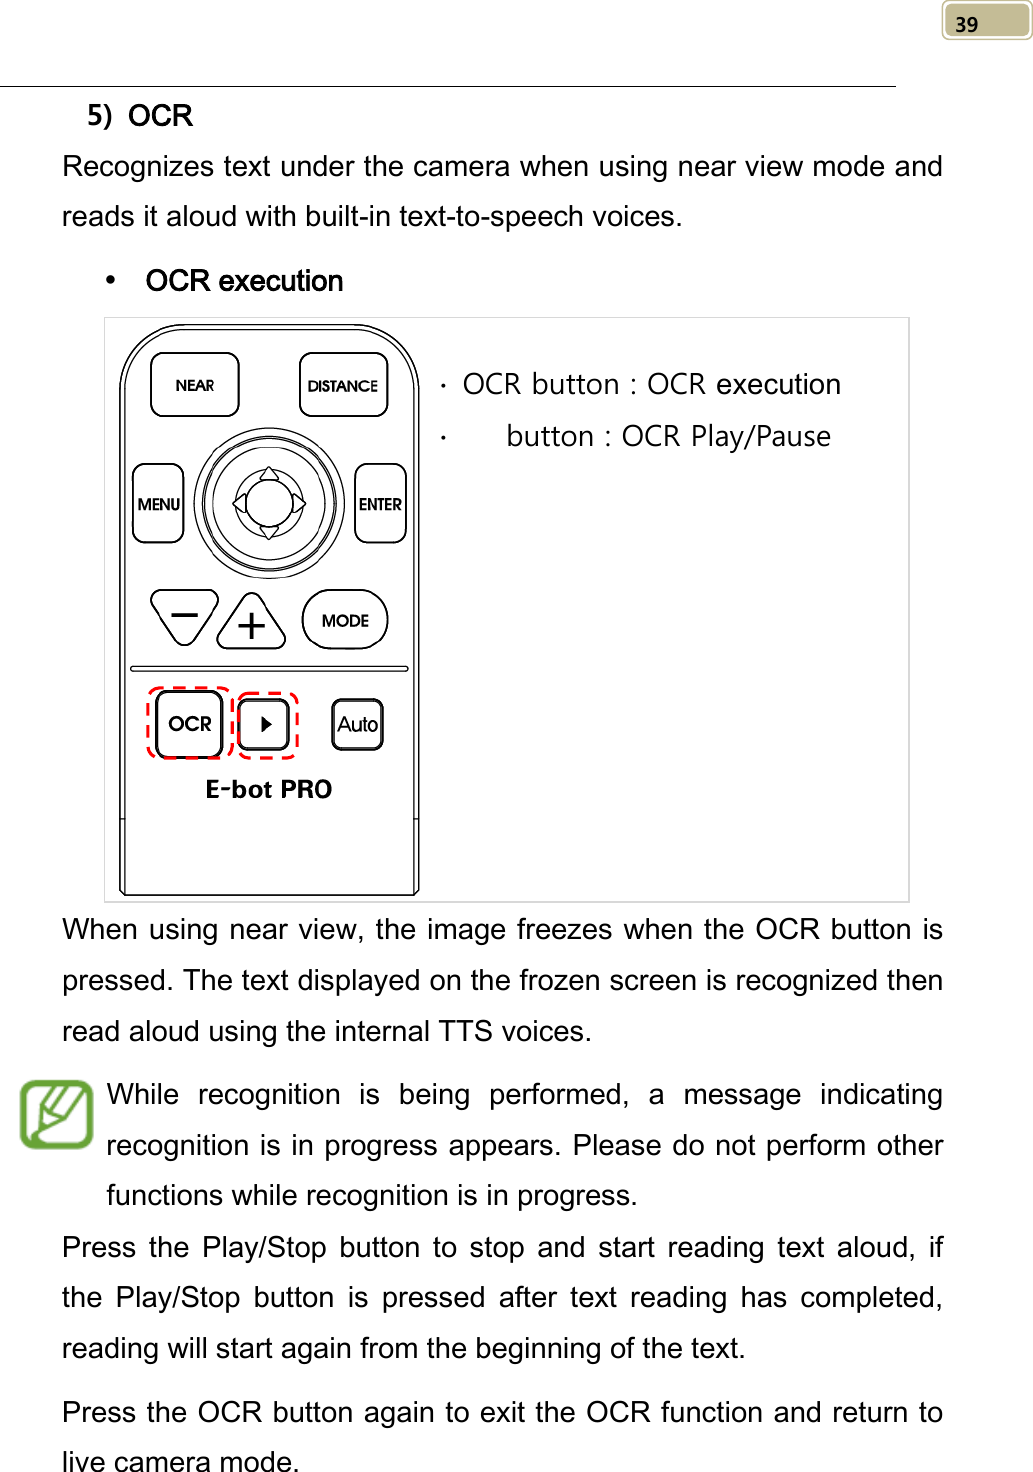   39 5) OCR Recognizes text under the camera when using near view mode and reads it aloud with built-in text-to-speech voices.  OCR execution  When using near view, the image freezes when the OCR button is pressed. The text displayed on the frozen screen is recognized then read aloud using the internal TTS voices. While recognition is being performed, a message indicating recognition is in progress appears. Please do not perform other functions while recognition is in progress.   Press  the  Play/Stop button to stop and start reading text aloud,  if the  Play/Stop button is pressed after text reading has completed, reading will start again from the beginning of the text. Press the OCR button again to exit the OCR function and return to live camera mode. ∙ OCR button : OCR execution ∙    button : OCR Play/Pause  